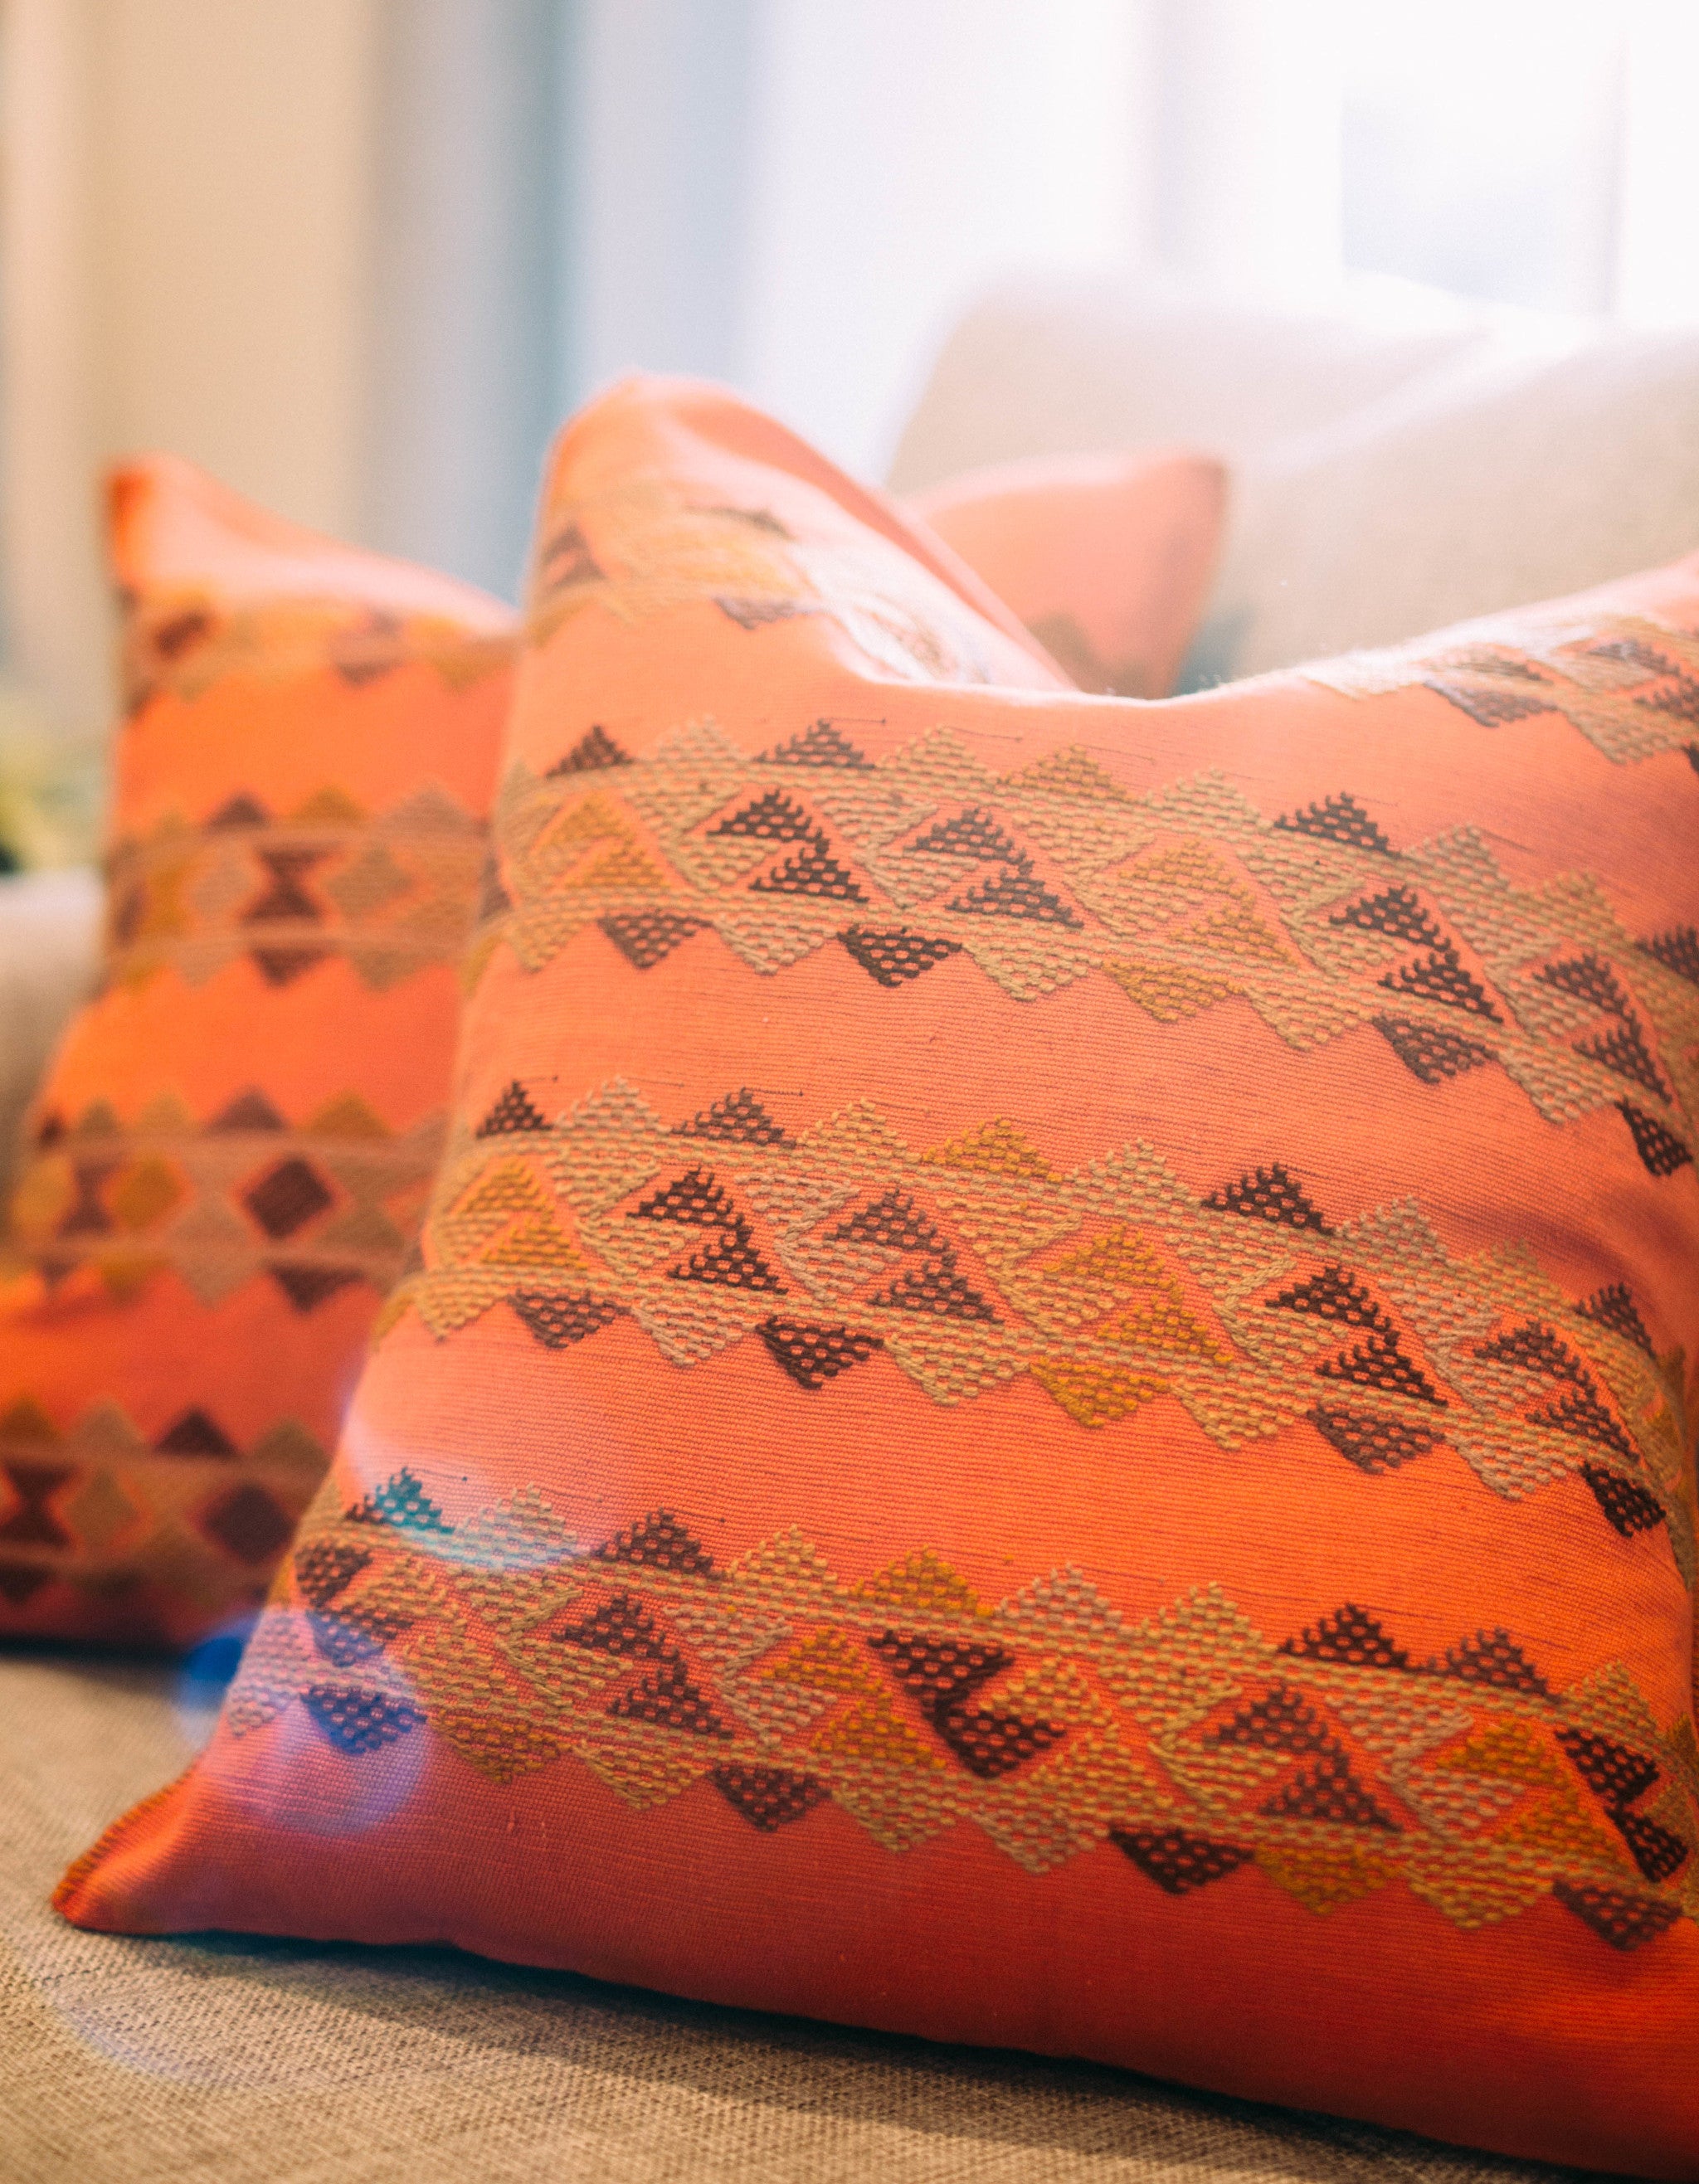 Hand-Loomed and Hand Embroidered Orange Geometric Pillow